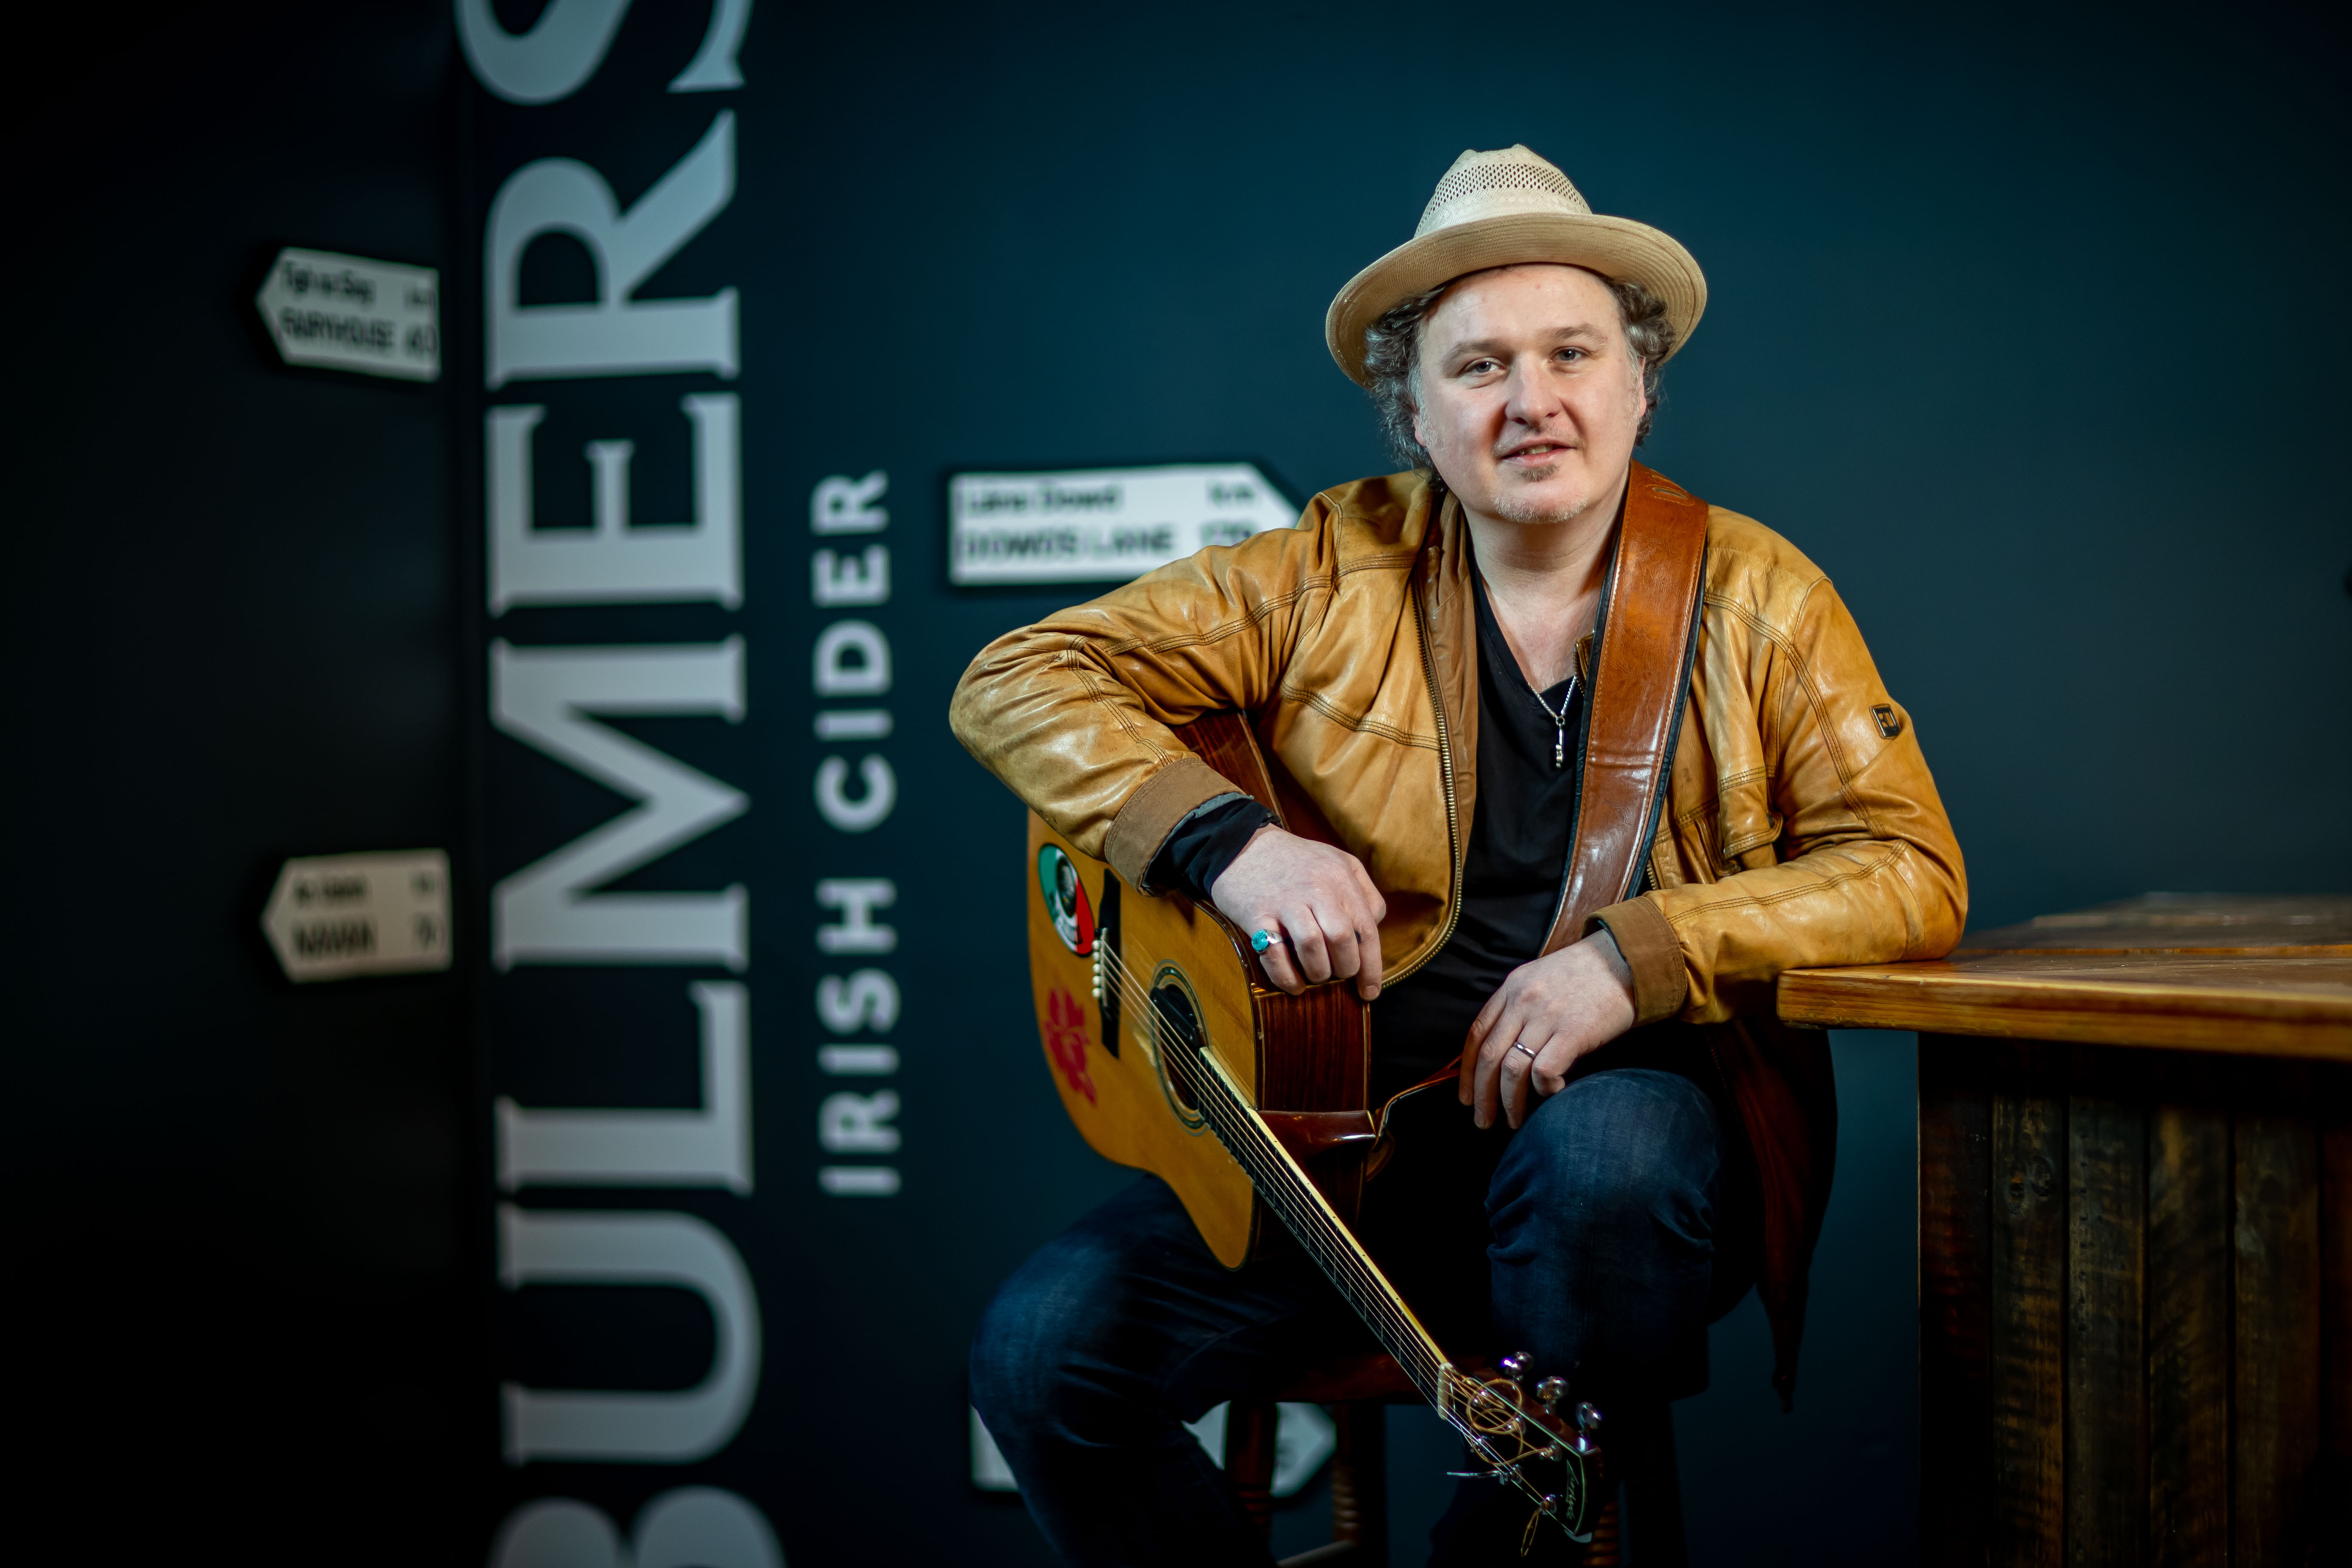 Top Irish Acts Mundy and Paddy Casey announced for Dublin Racing Festival